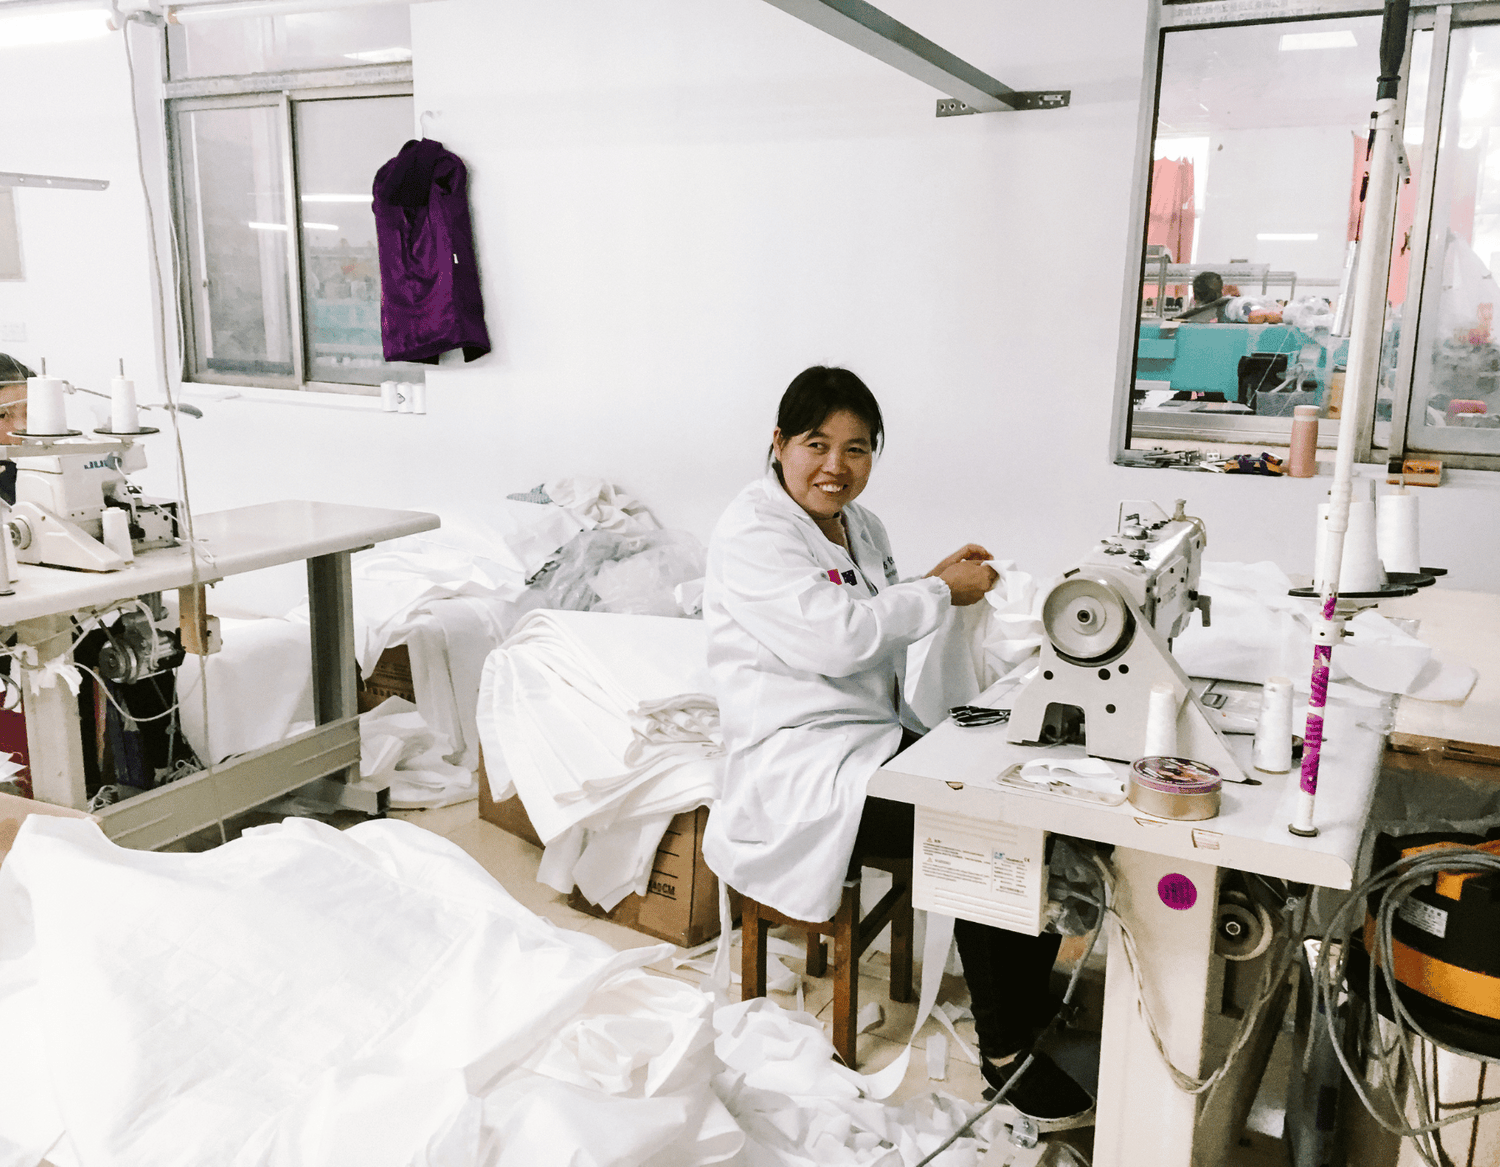 THe sewing room at the factory with a worker at a sewing machine working on a white Brolly Sheet.